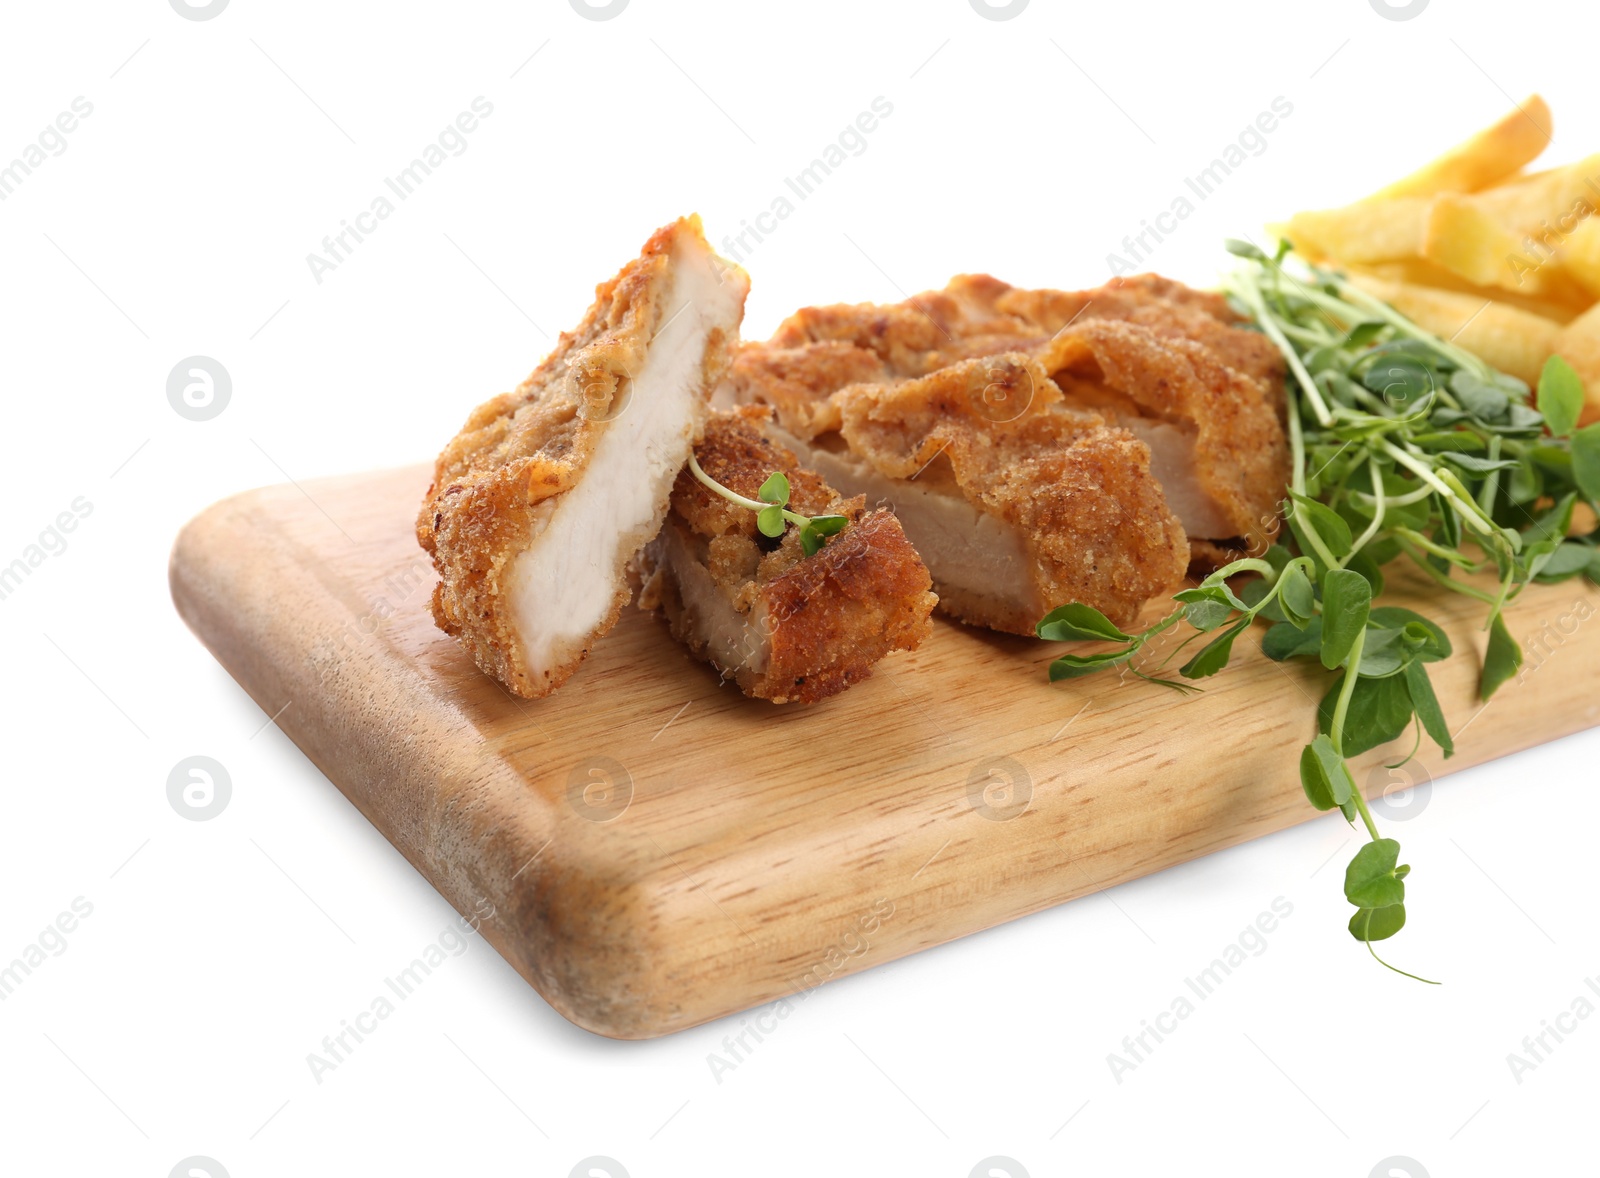 Photo of Delicious cut schnitzel with french fries and microgreens on white background